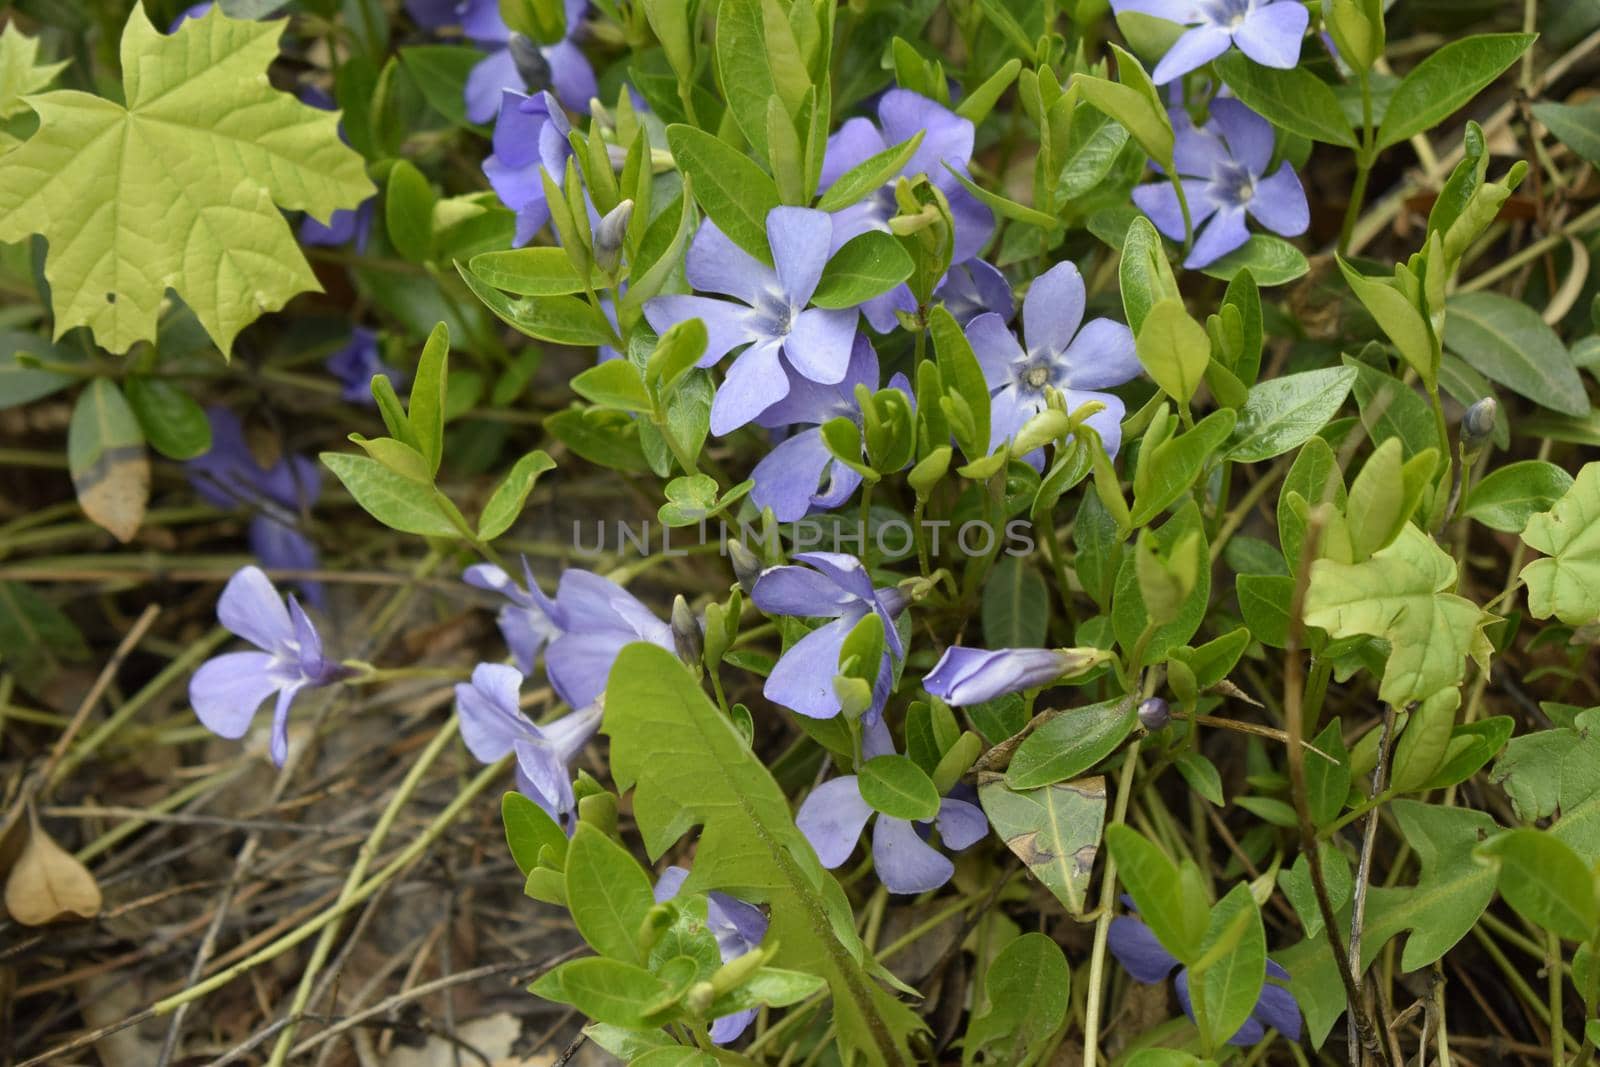 Vinca minor (common names lesser periwinkle, dwarf periwinkle, small periwinkle, common periwinkle) is a species of flowering plant native to central and southern Europe.